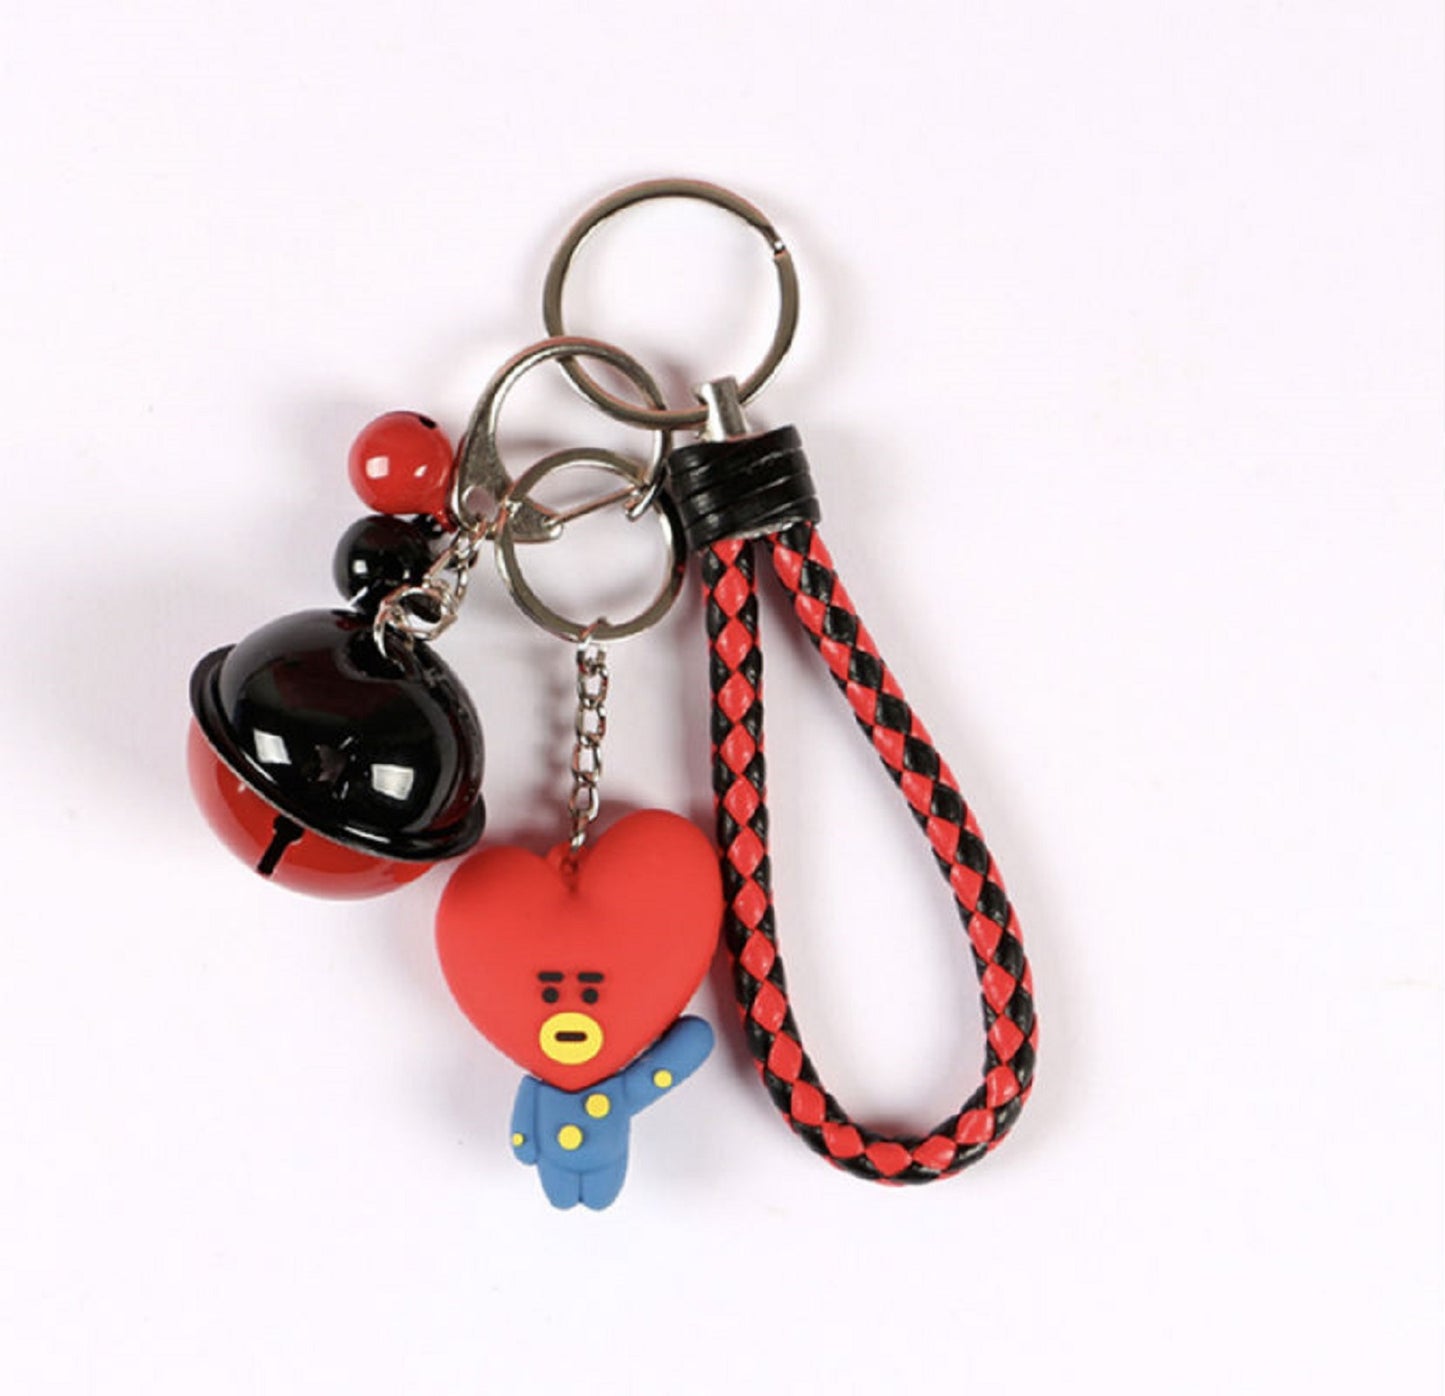 K-Pop BTS Keychain Bell BT21 - Super Anime Store FREE SHIPPING FAST SHIPPING USA